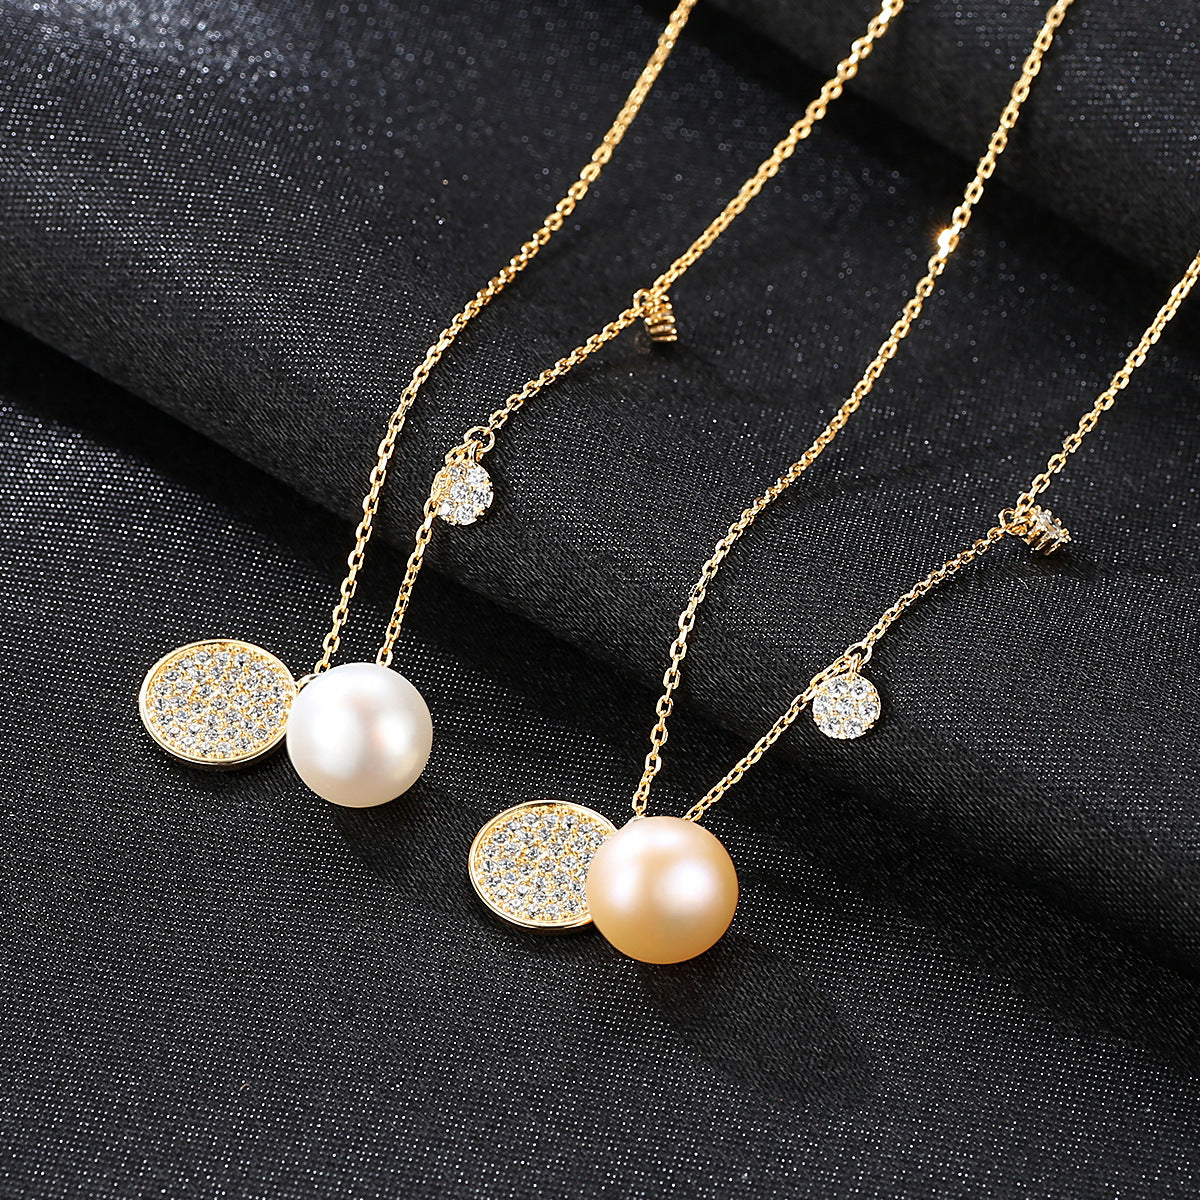 8mm Pearl Necklace with Round Coins - HERS